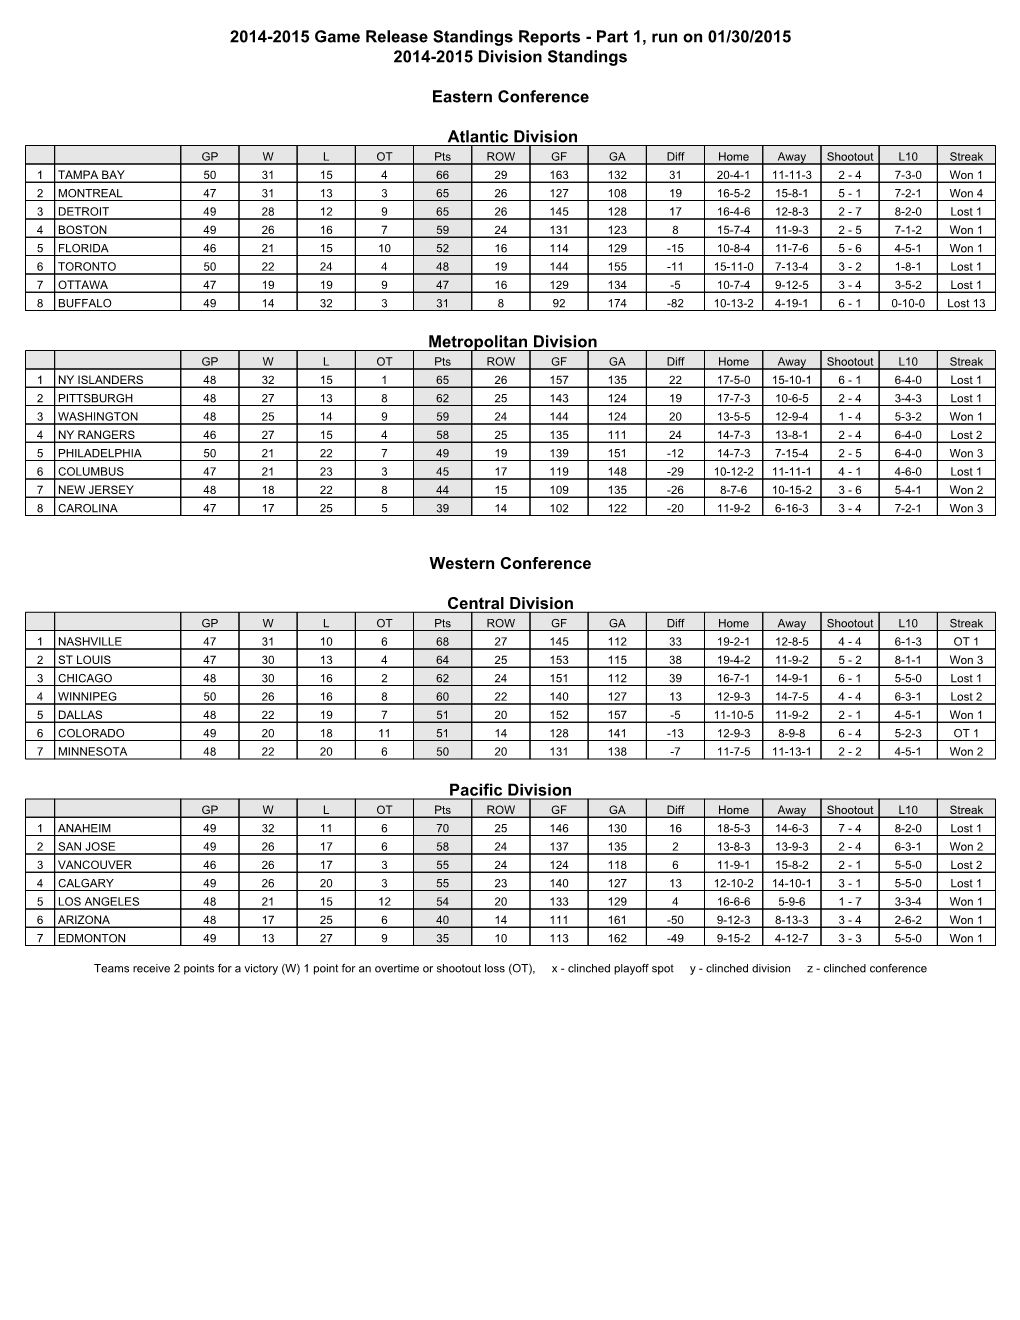 2014-2015 Game Release Standings Reports - Part 1, Run on 01/30/2015 2014-2015 Division Standings